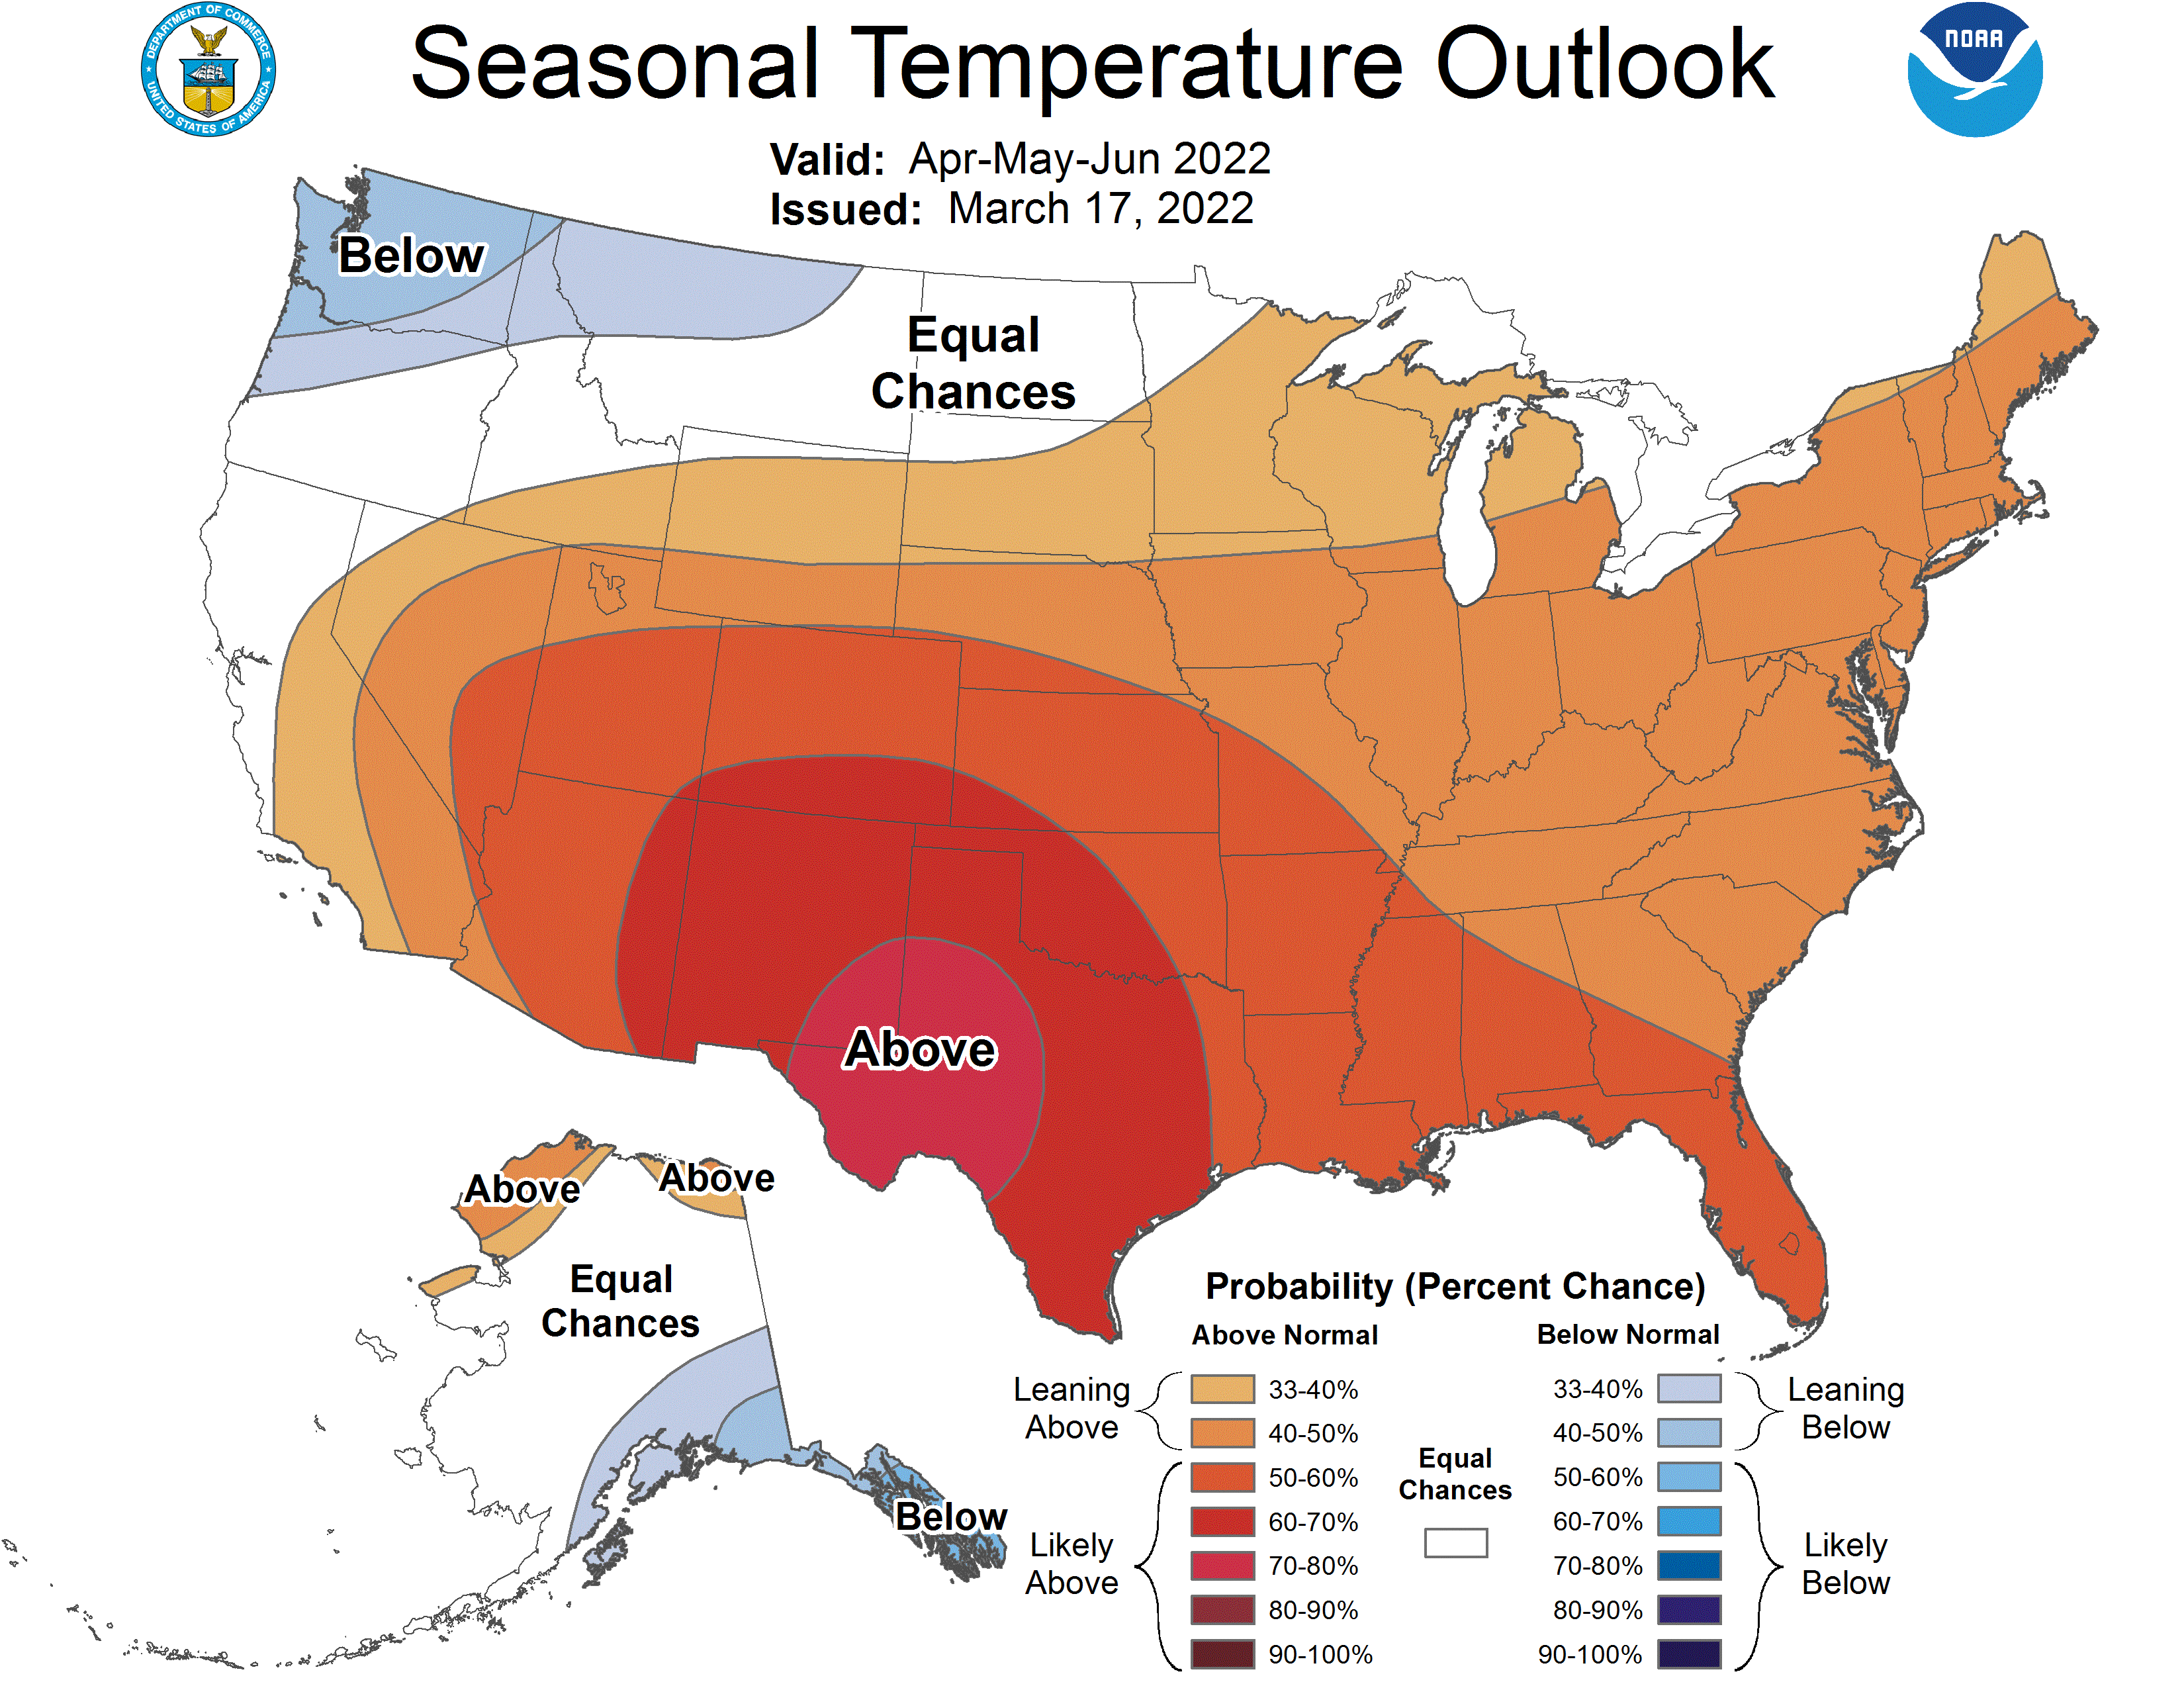 Probability of above normal temperature for the United States April through June 2022